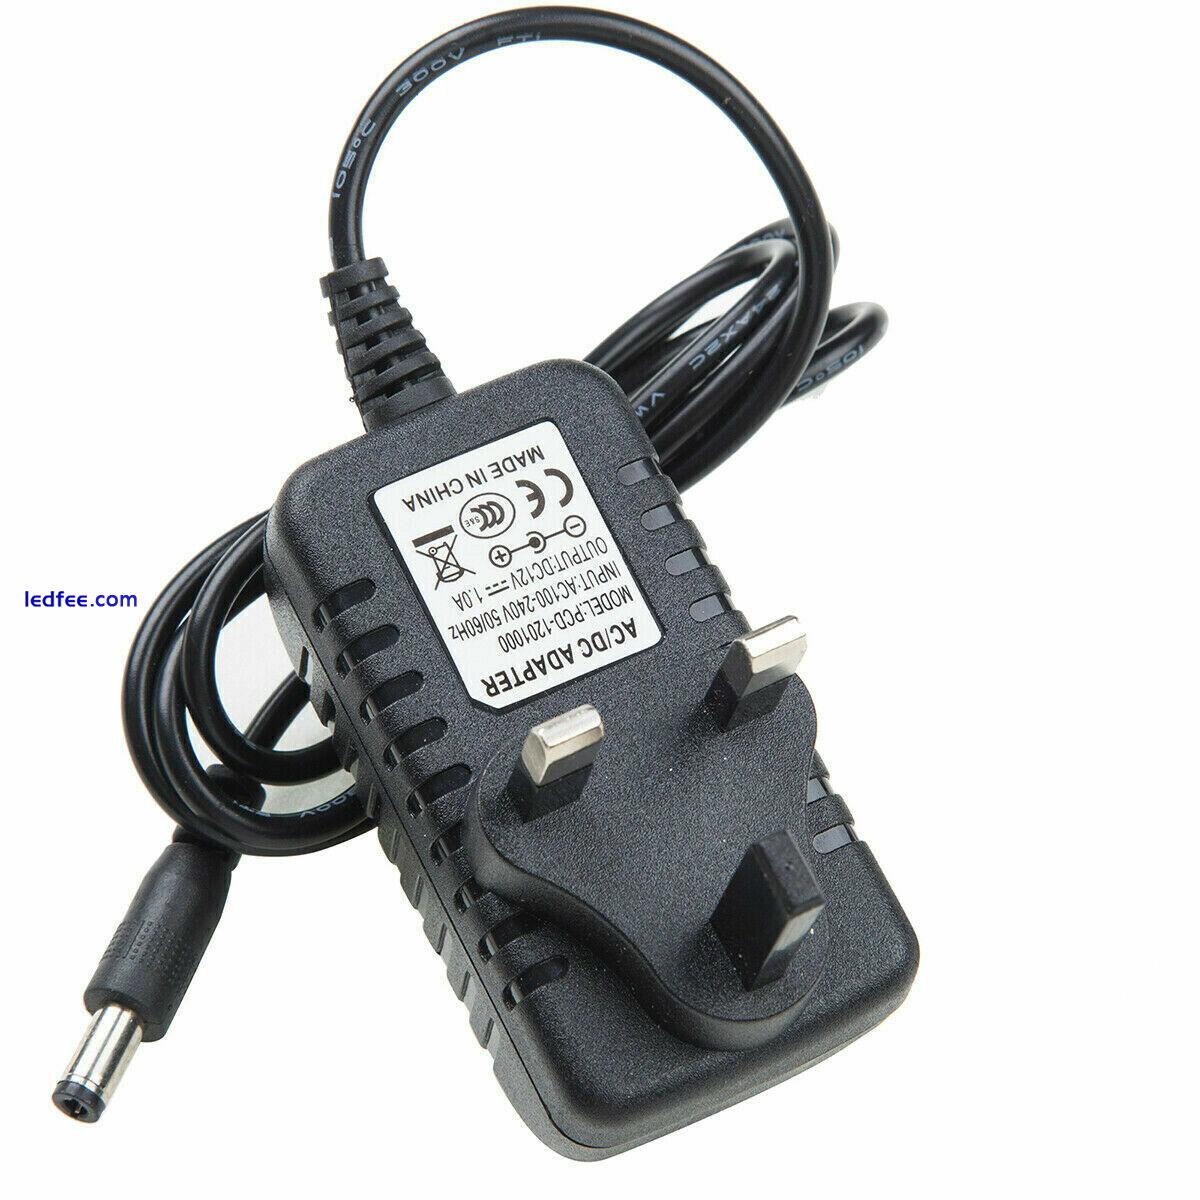 12V 1A 2A AC/DC UK Power Supply Adapter Safety Charger For LED Strip CCTV 2 